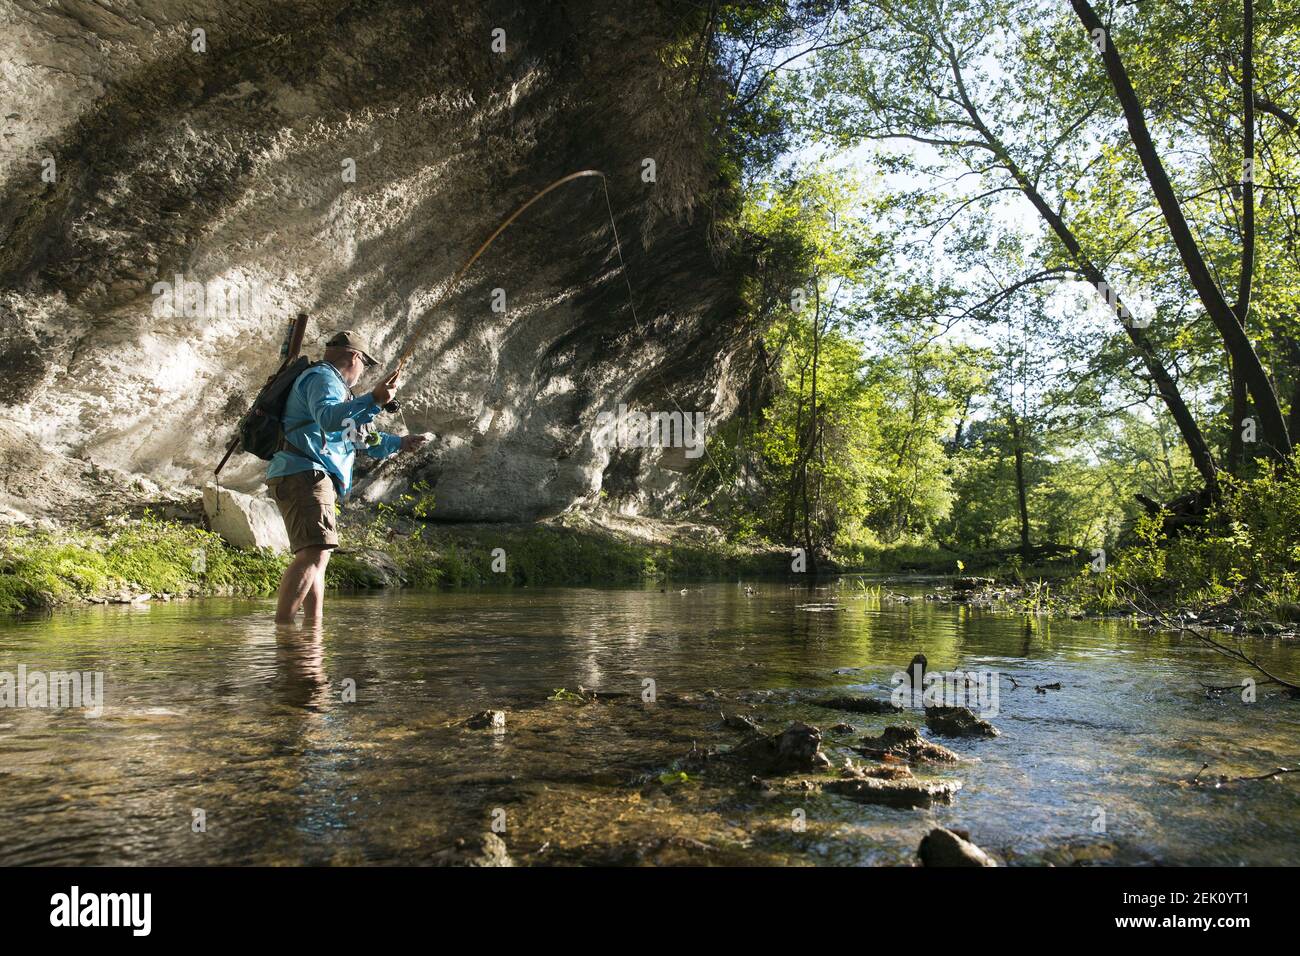 Apr 24, 2020; Georgetown, TX, USA; Aaron Reed, author of Fly Fishing Austin & Central Texas guide book fly fishes the San Gabriel River, one of his home rivers. (Image from photo essay of Texans doing isolated outdoor activities in their own communities.) (Photo by Erich Schlegel/USA Today Network/Sipa USA) Stock Photo